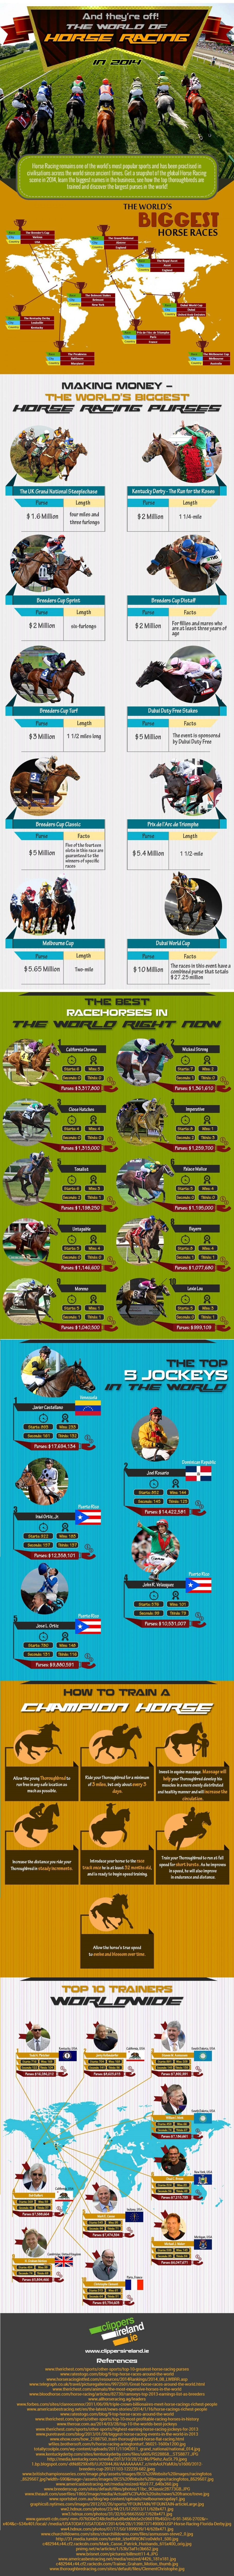 And They’re Off! The World of Horse Racing in 2014